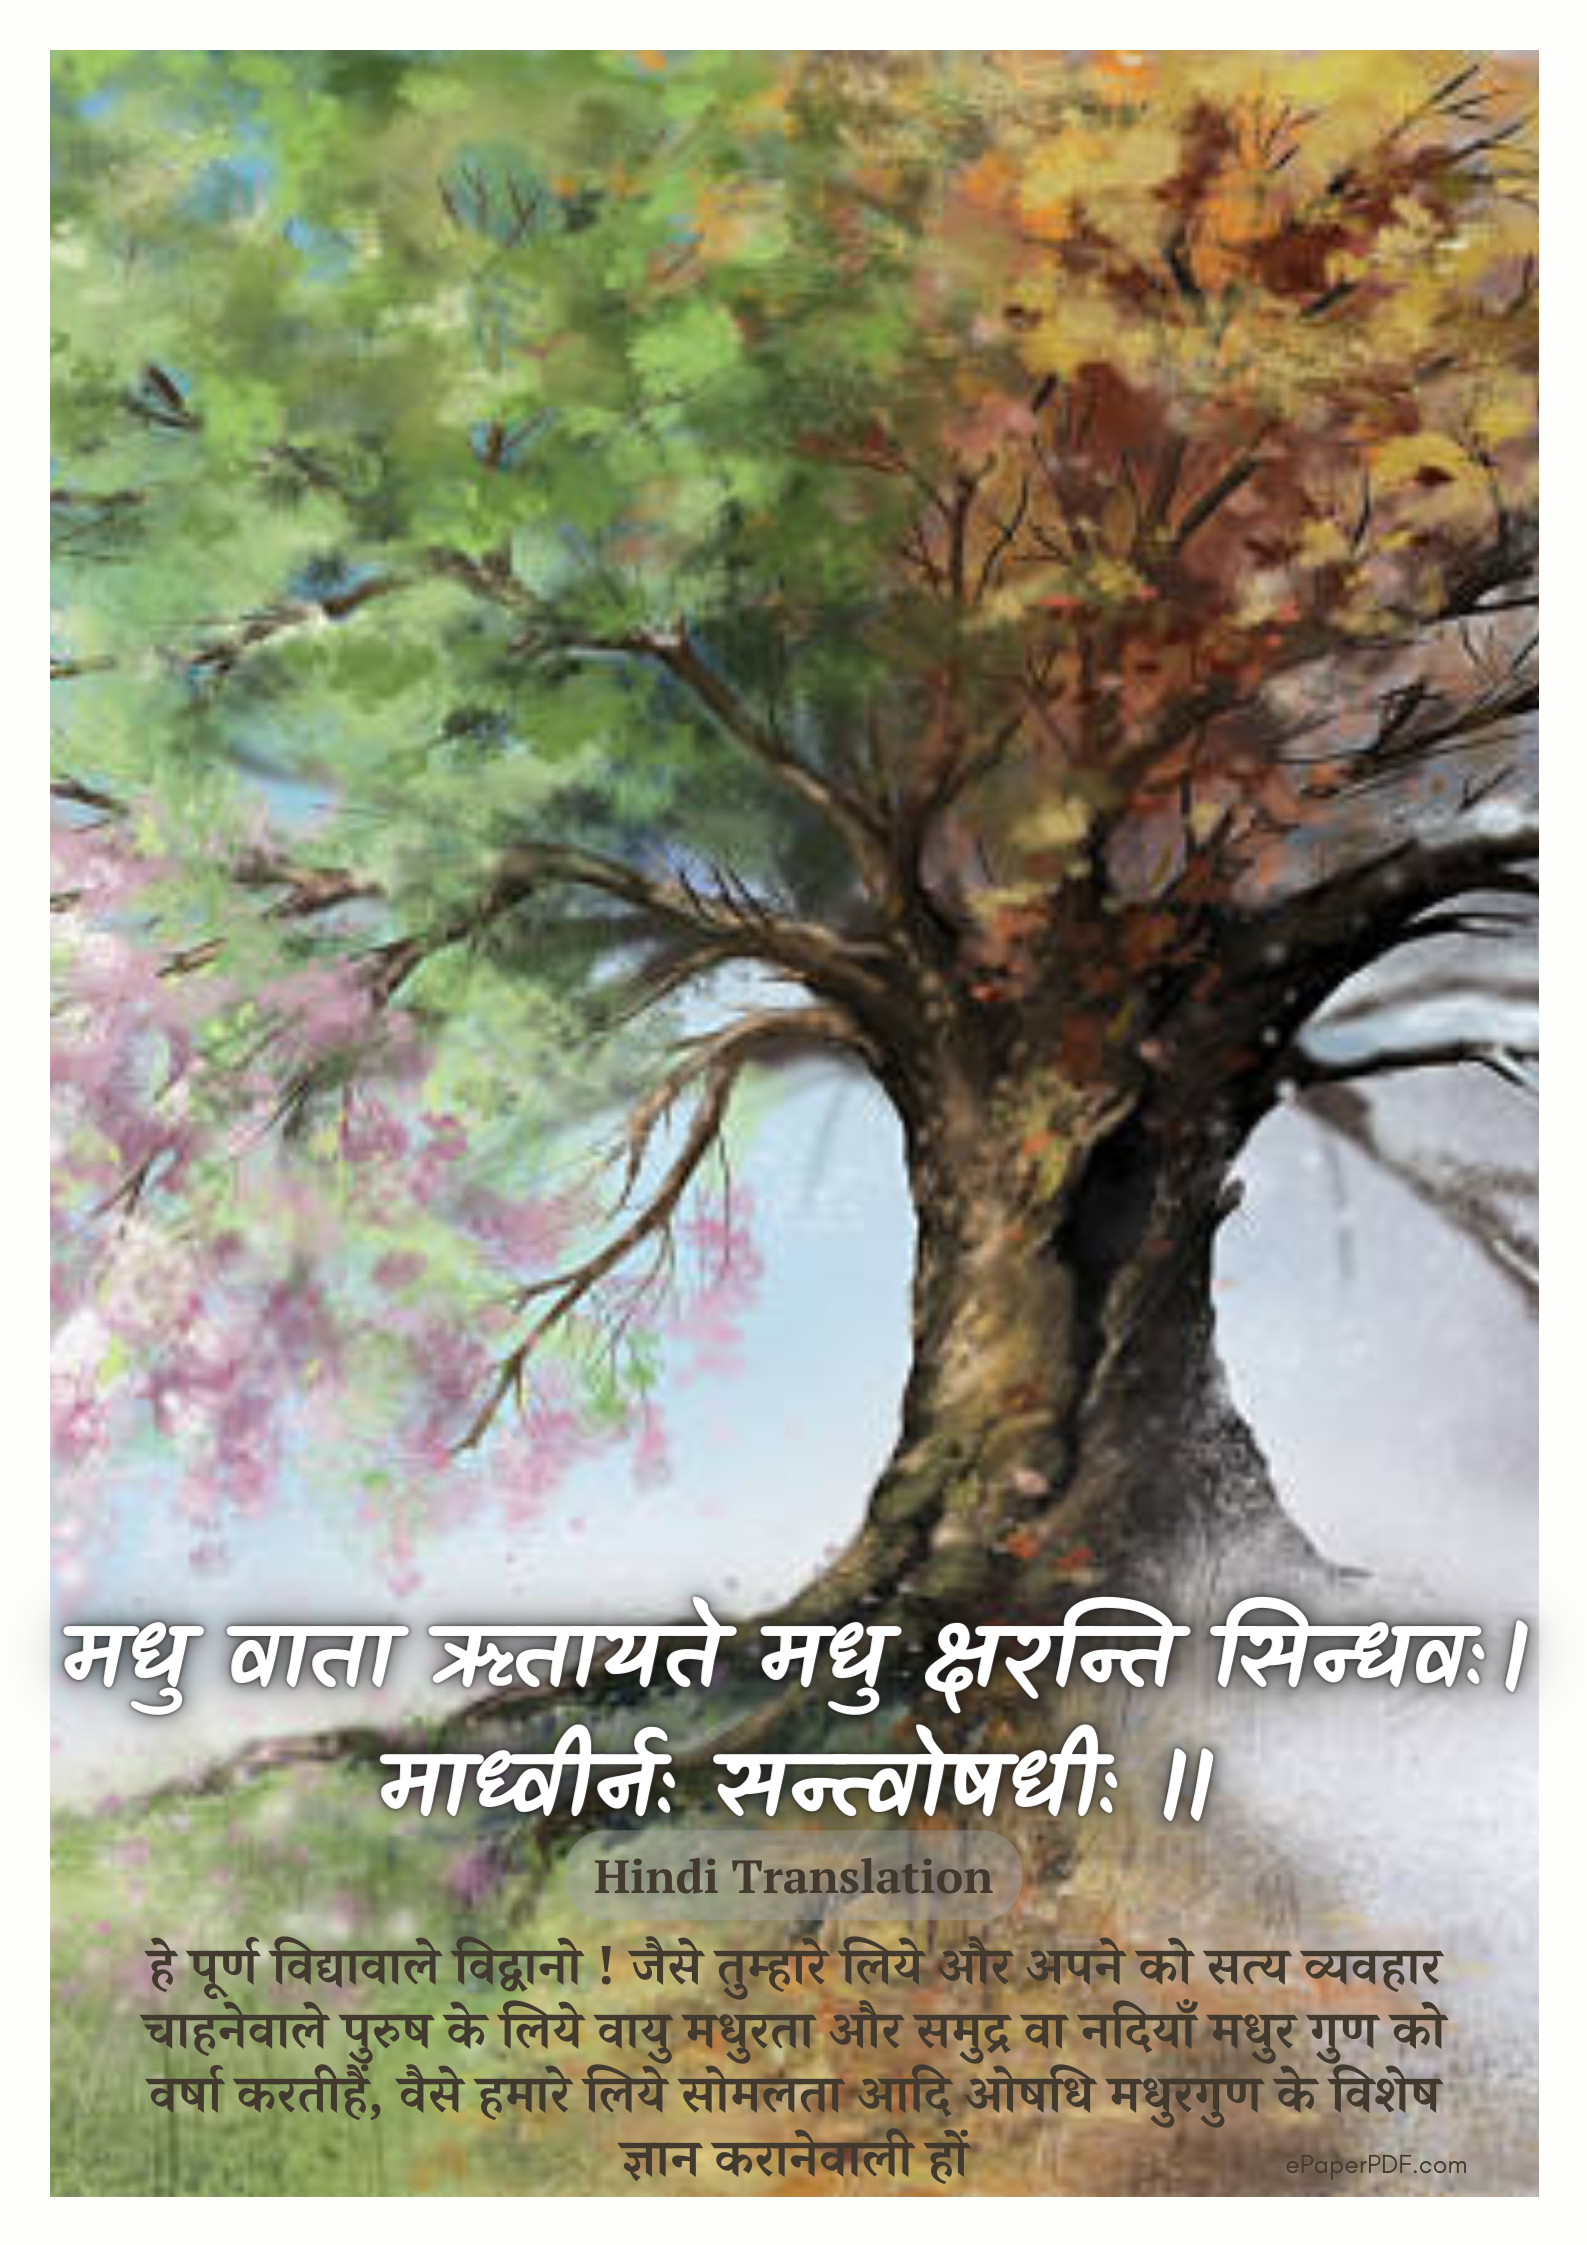 Sanskrit Quotes On Plants With Meaning: Best Quotes, Wallpapers, etc.